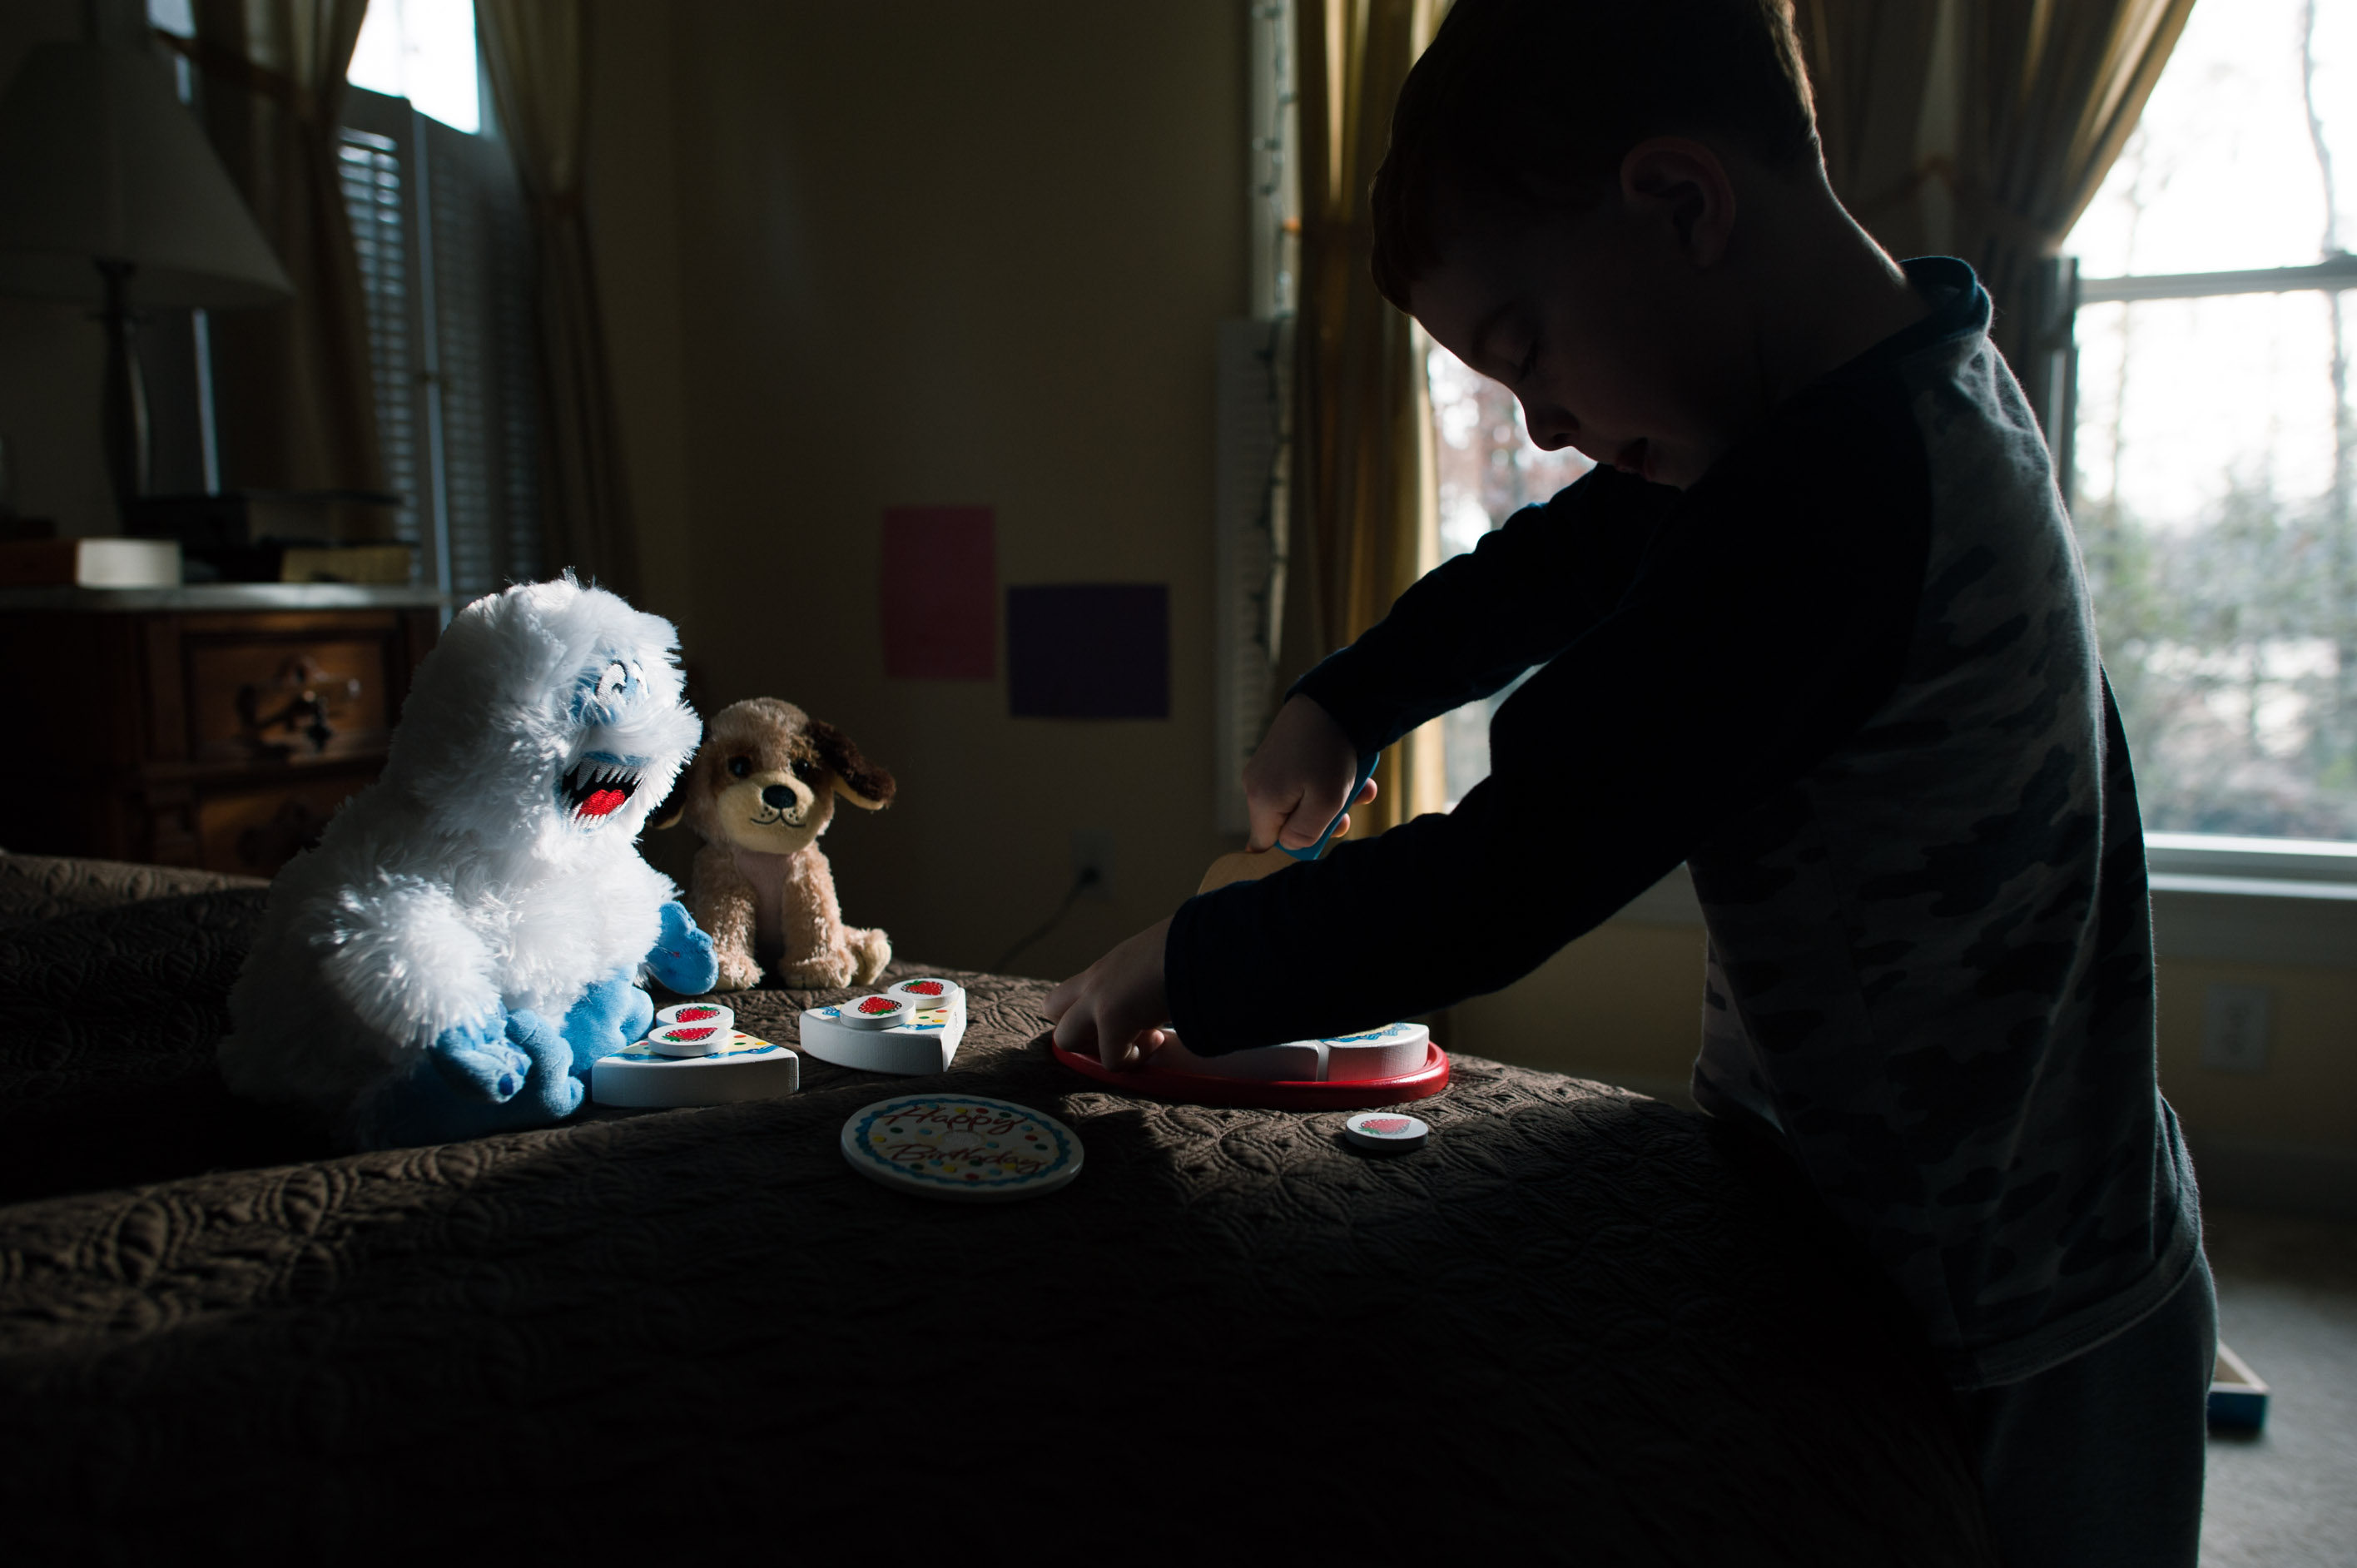 boy serves meal to stuffed animals - Family Documentary Photography